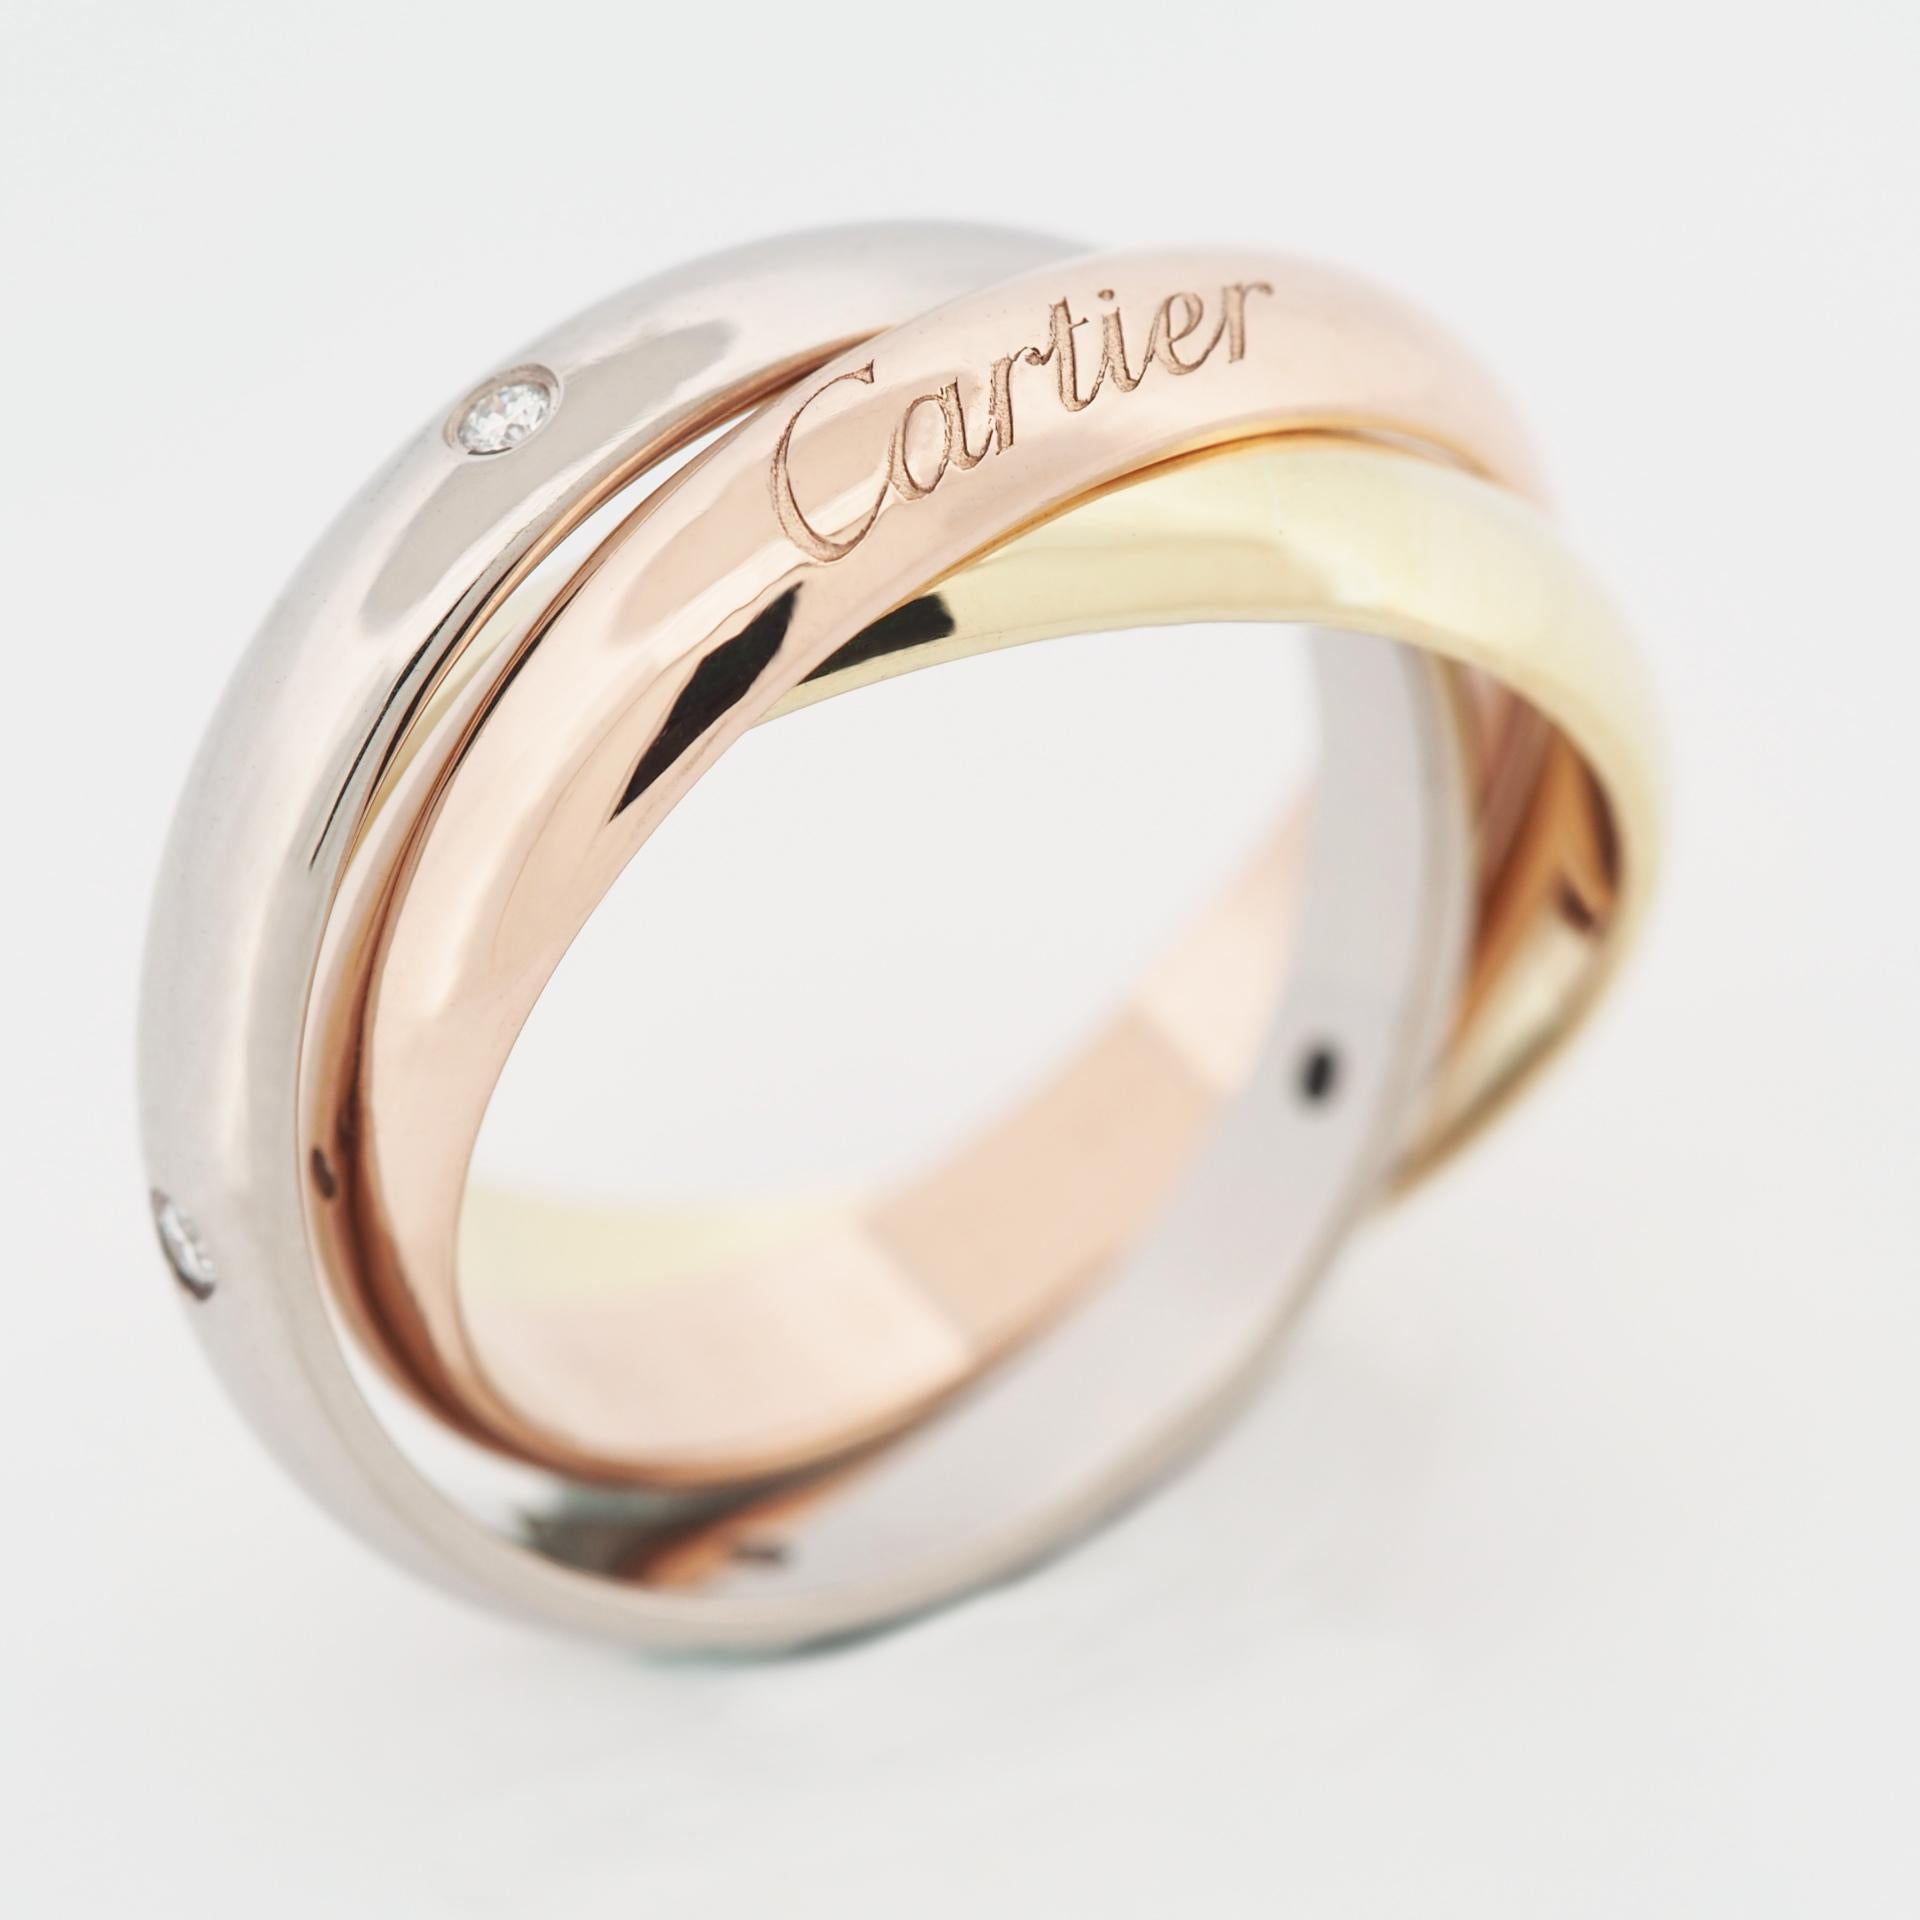 Item: Authentic Cartier Trinity Ring
Stones: 5 diamonds ( 0.04 carats )
Metal: 18K Yellow / Rose / White Gold
Ring Size: 51 US SIZE 5.75 UK SIZE K 3/4
Internal Diameter:  16.30 mm
Measurement:  3.5 mm
Weight:  10.0 Grams
Condition: Used